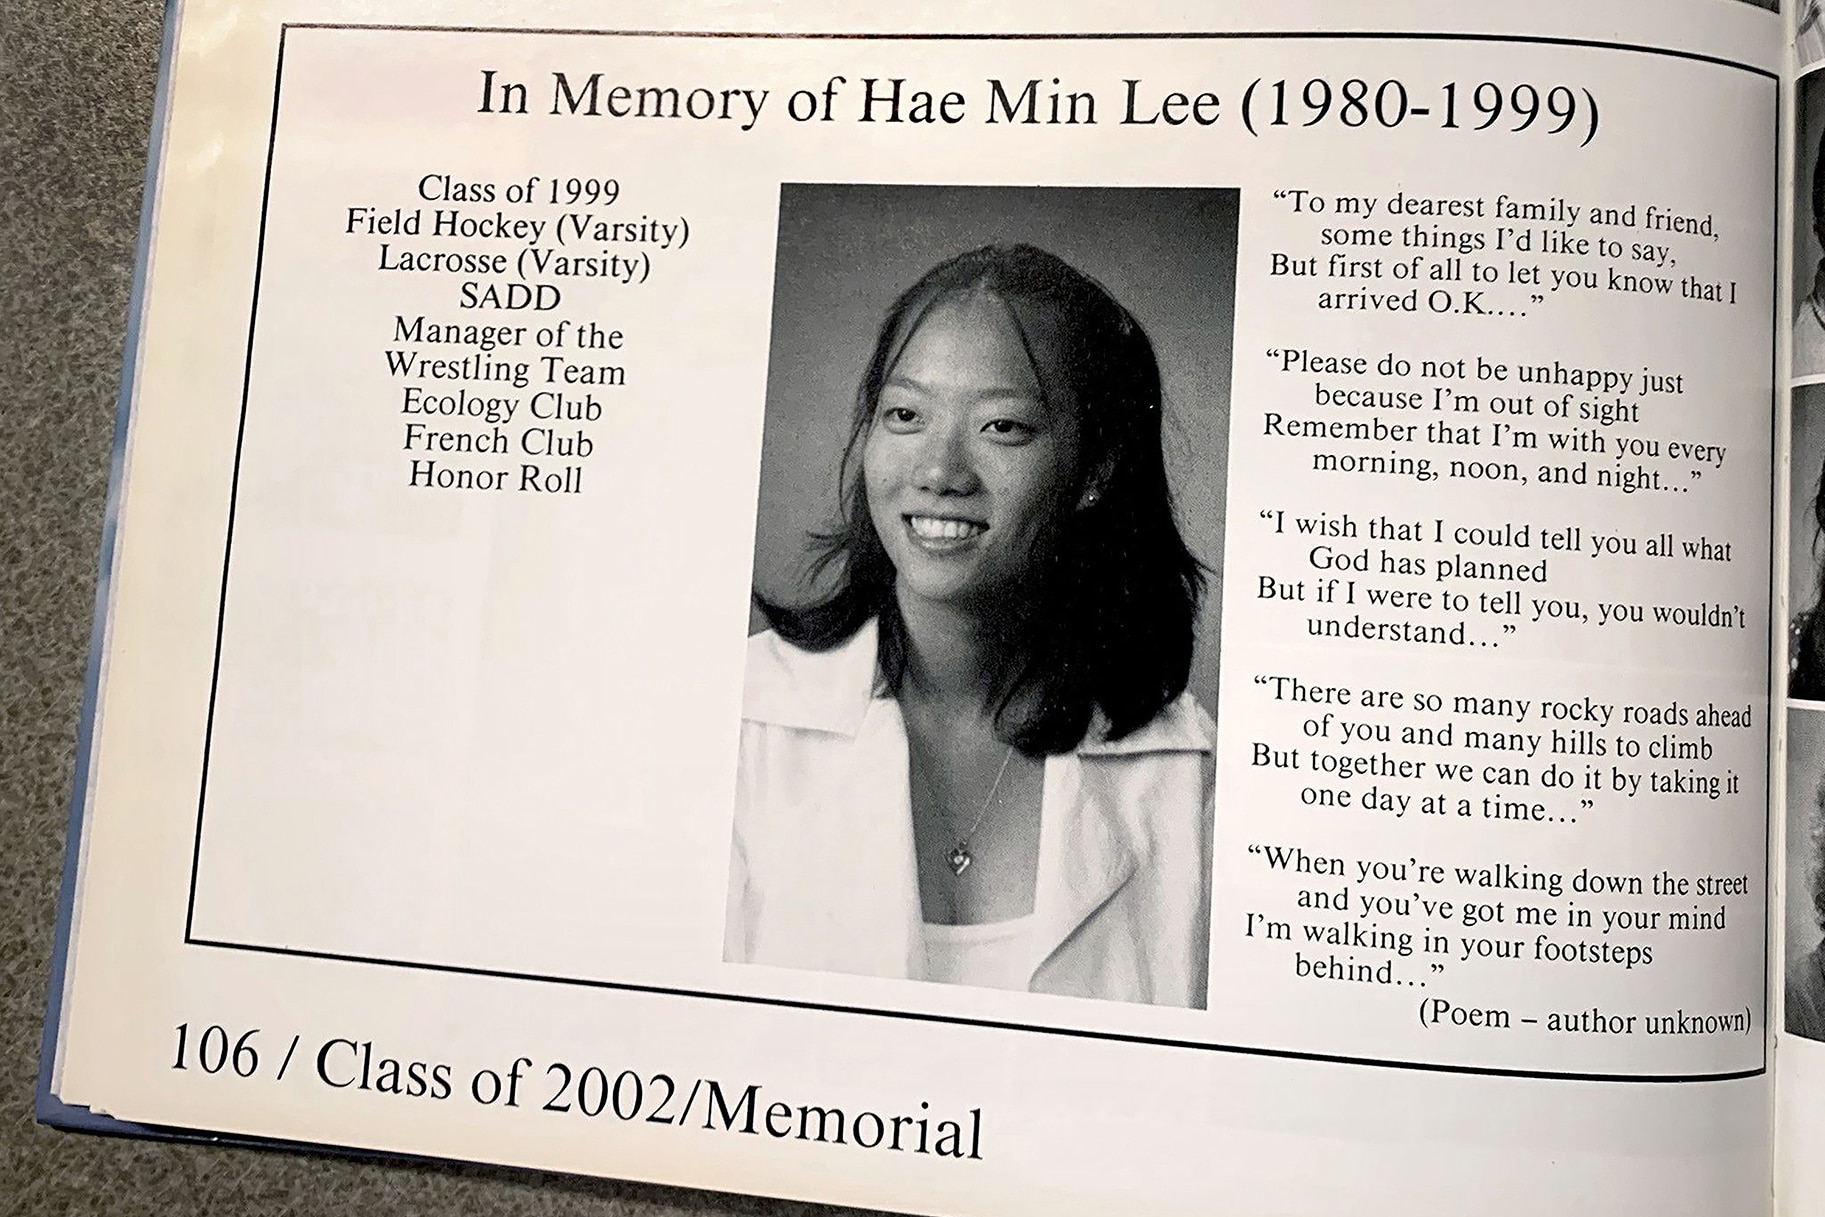 A tribute to Hae Min Lee